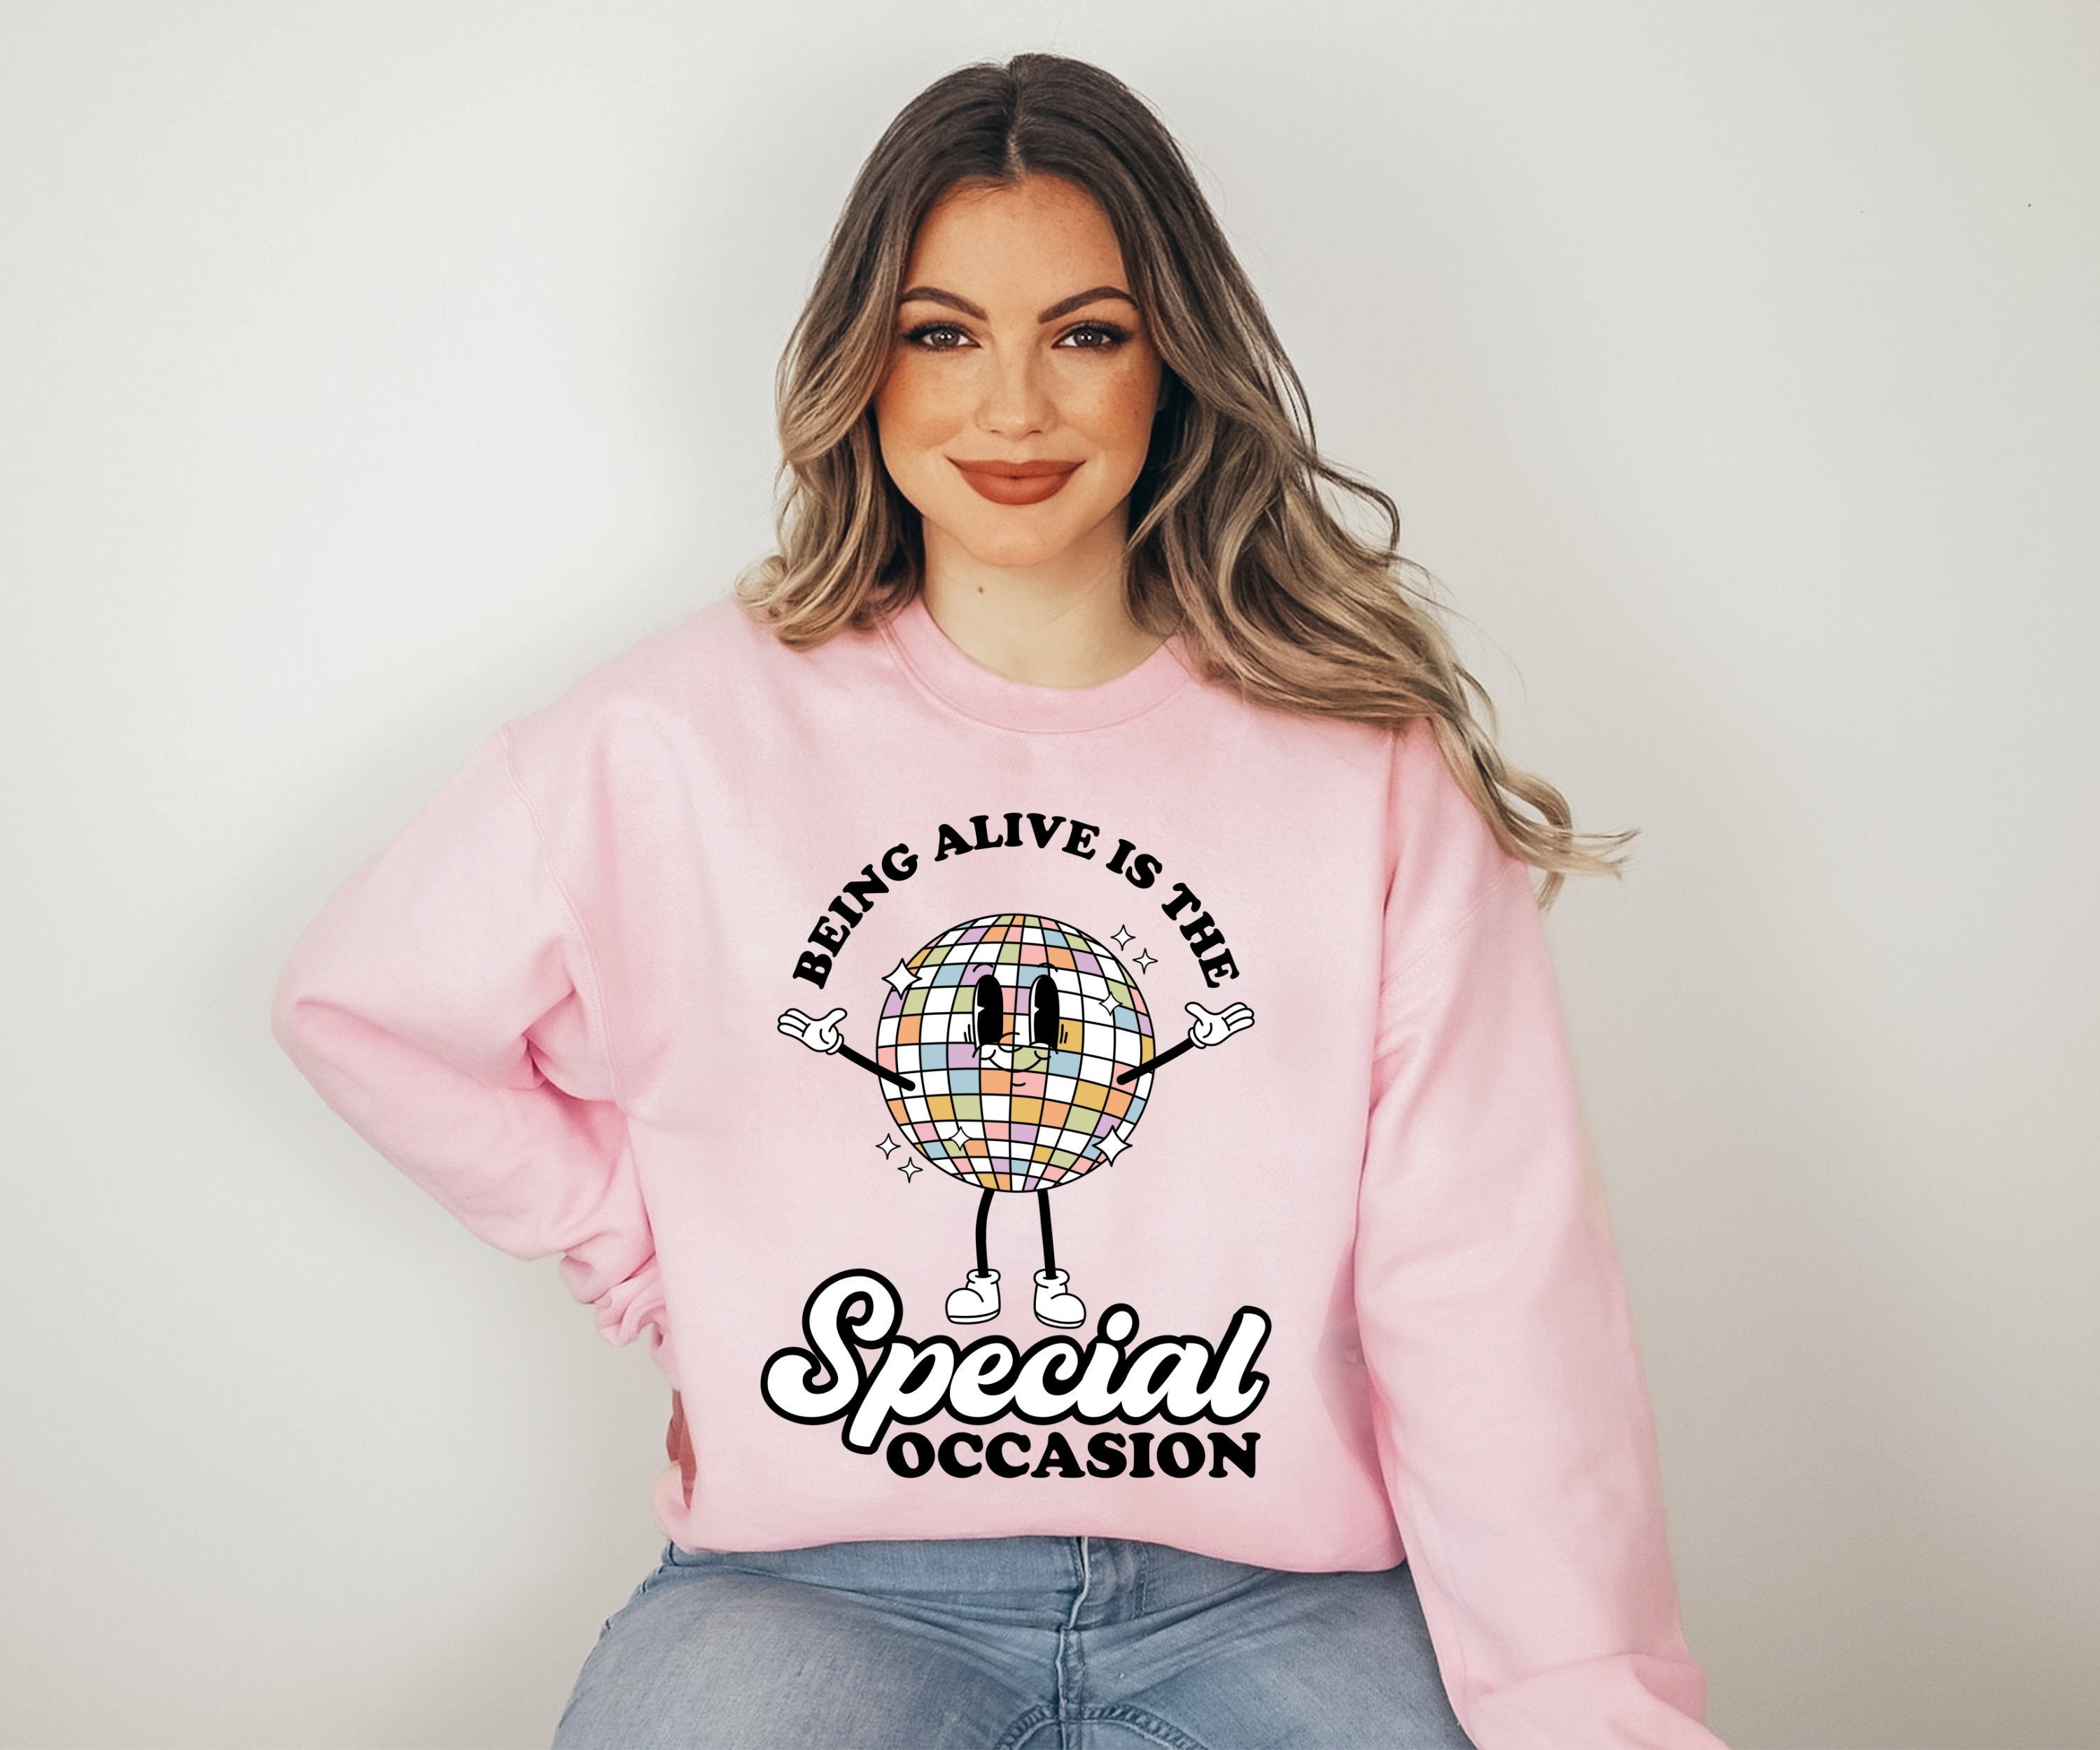 Buy Good Vibes Sweatshirt, Motivational T-shirt, Trendy Oversized  Sweatshirt, Good Vibes Shirt, Being Alive is the Special Occasion  Sweatshirt Online in India - Etsy | V-Shirts